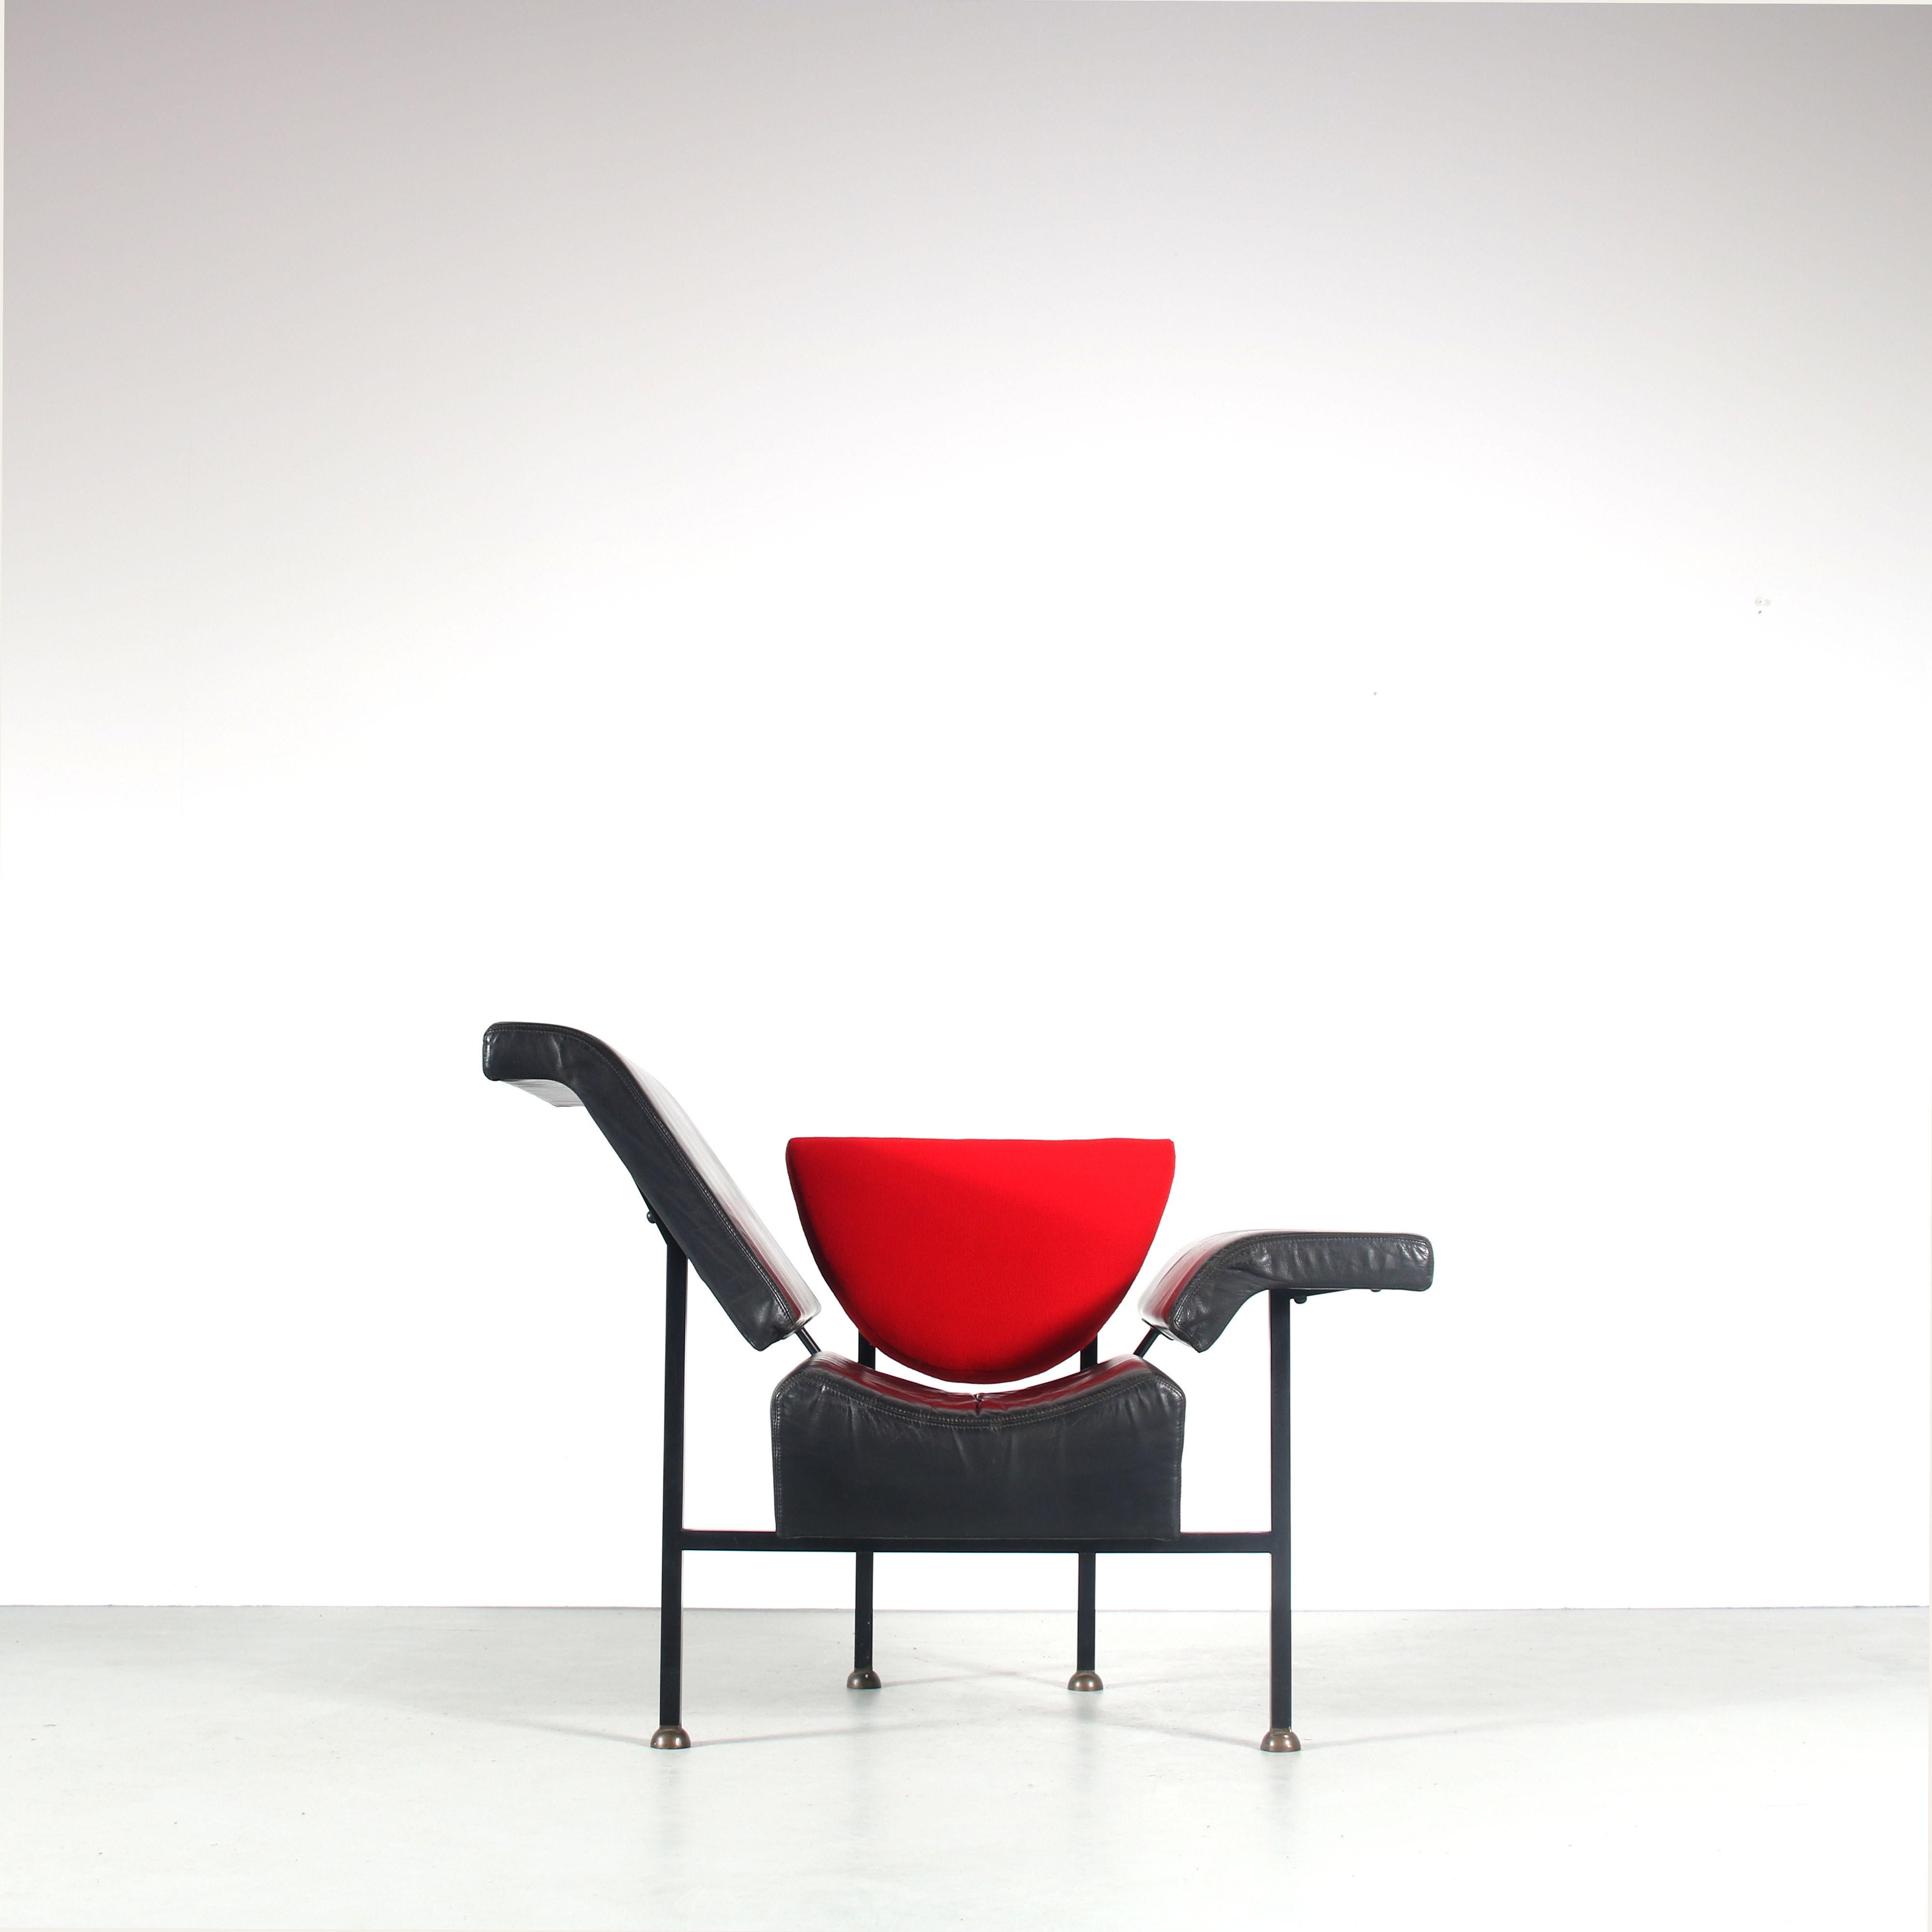 Late 20th Century “Groeten Uit Holland” Chair by Rob Eckhardt for Pastoe, Netherlands, 1980